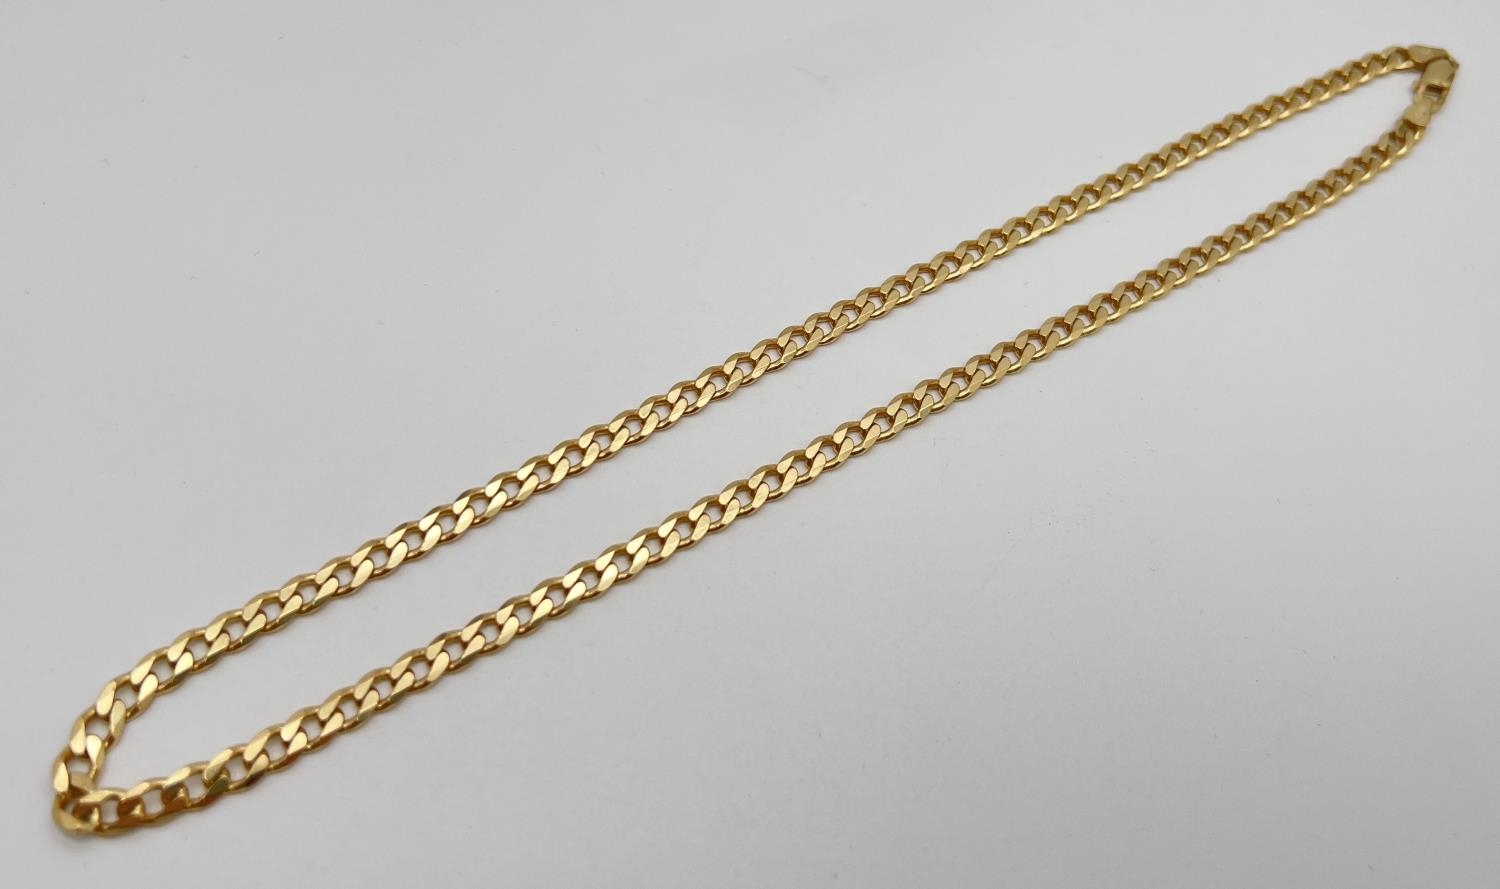 A 20 inch silver gilt heavy curb chain necklace with lobster style clasp. Silver marks to clasp - Image 2 of 2